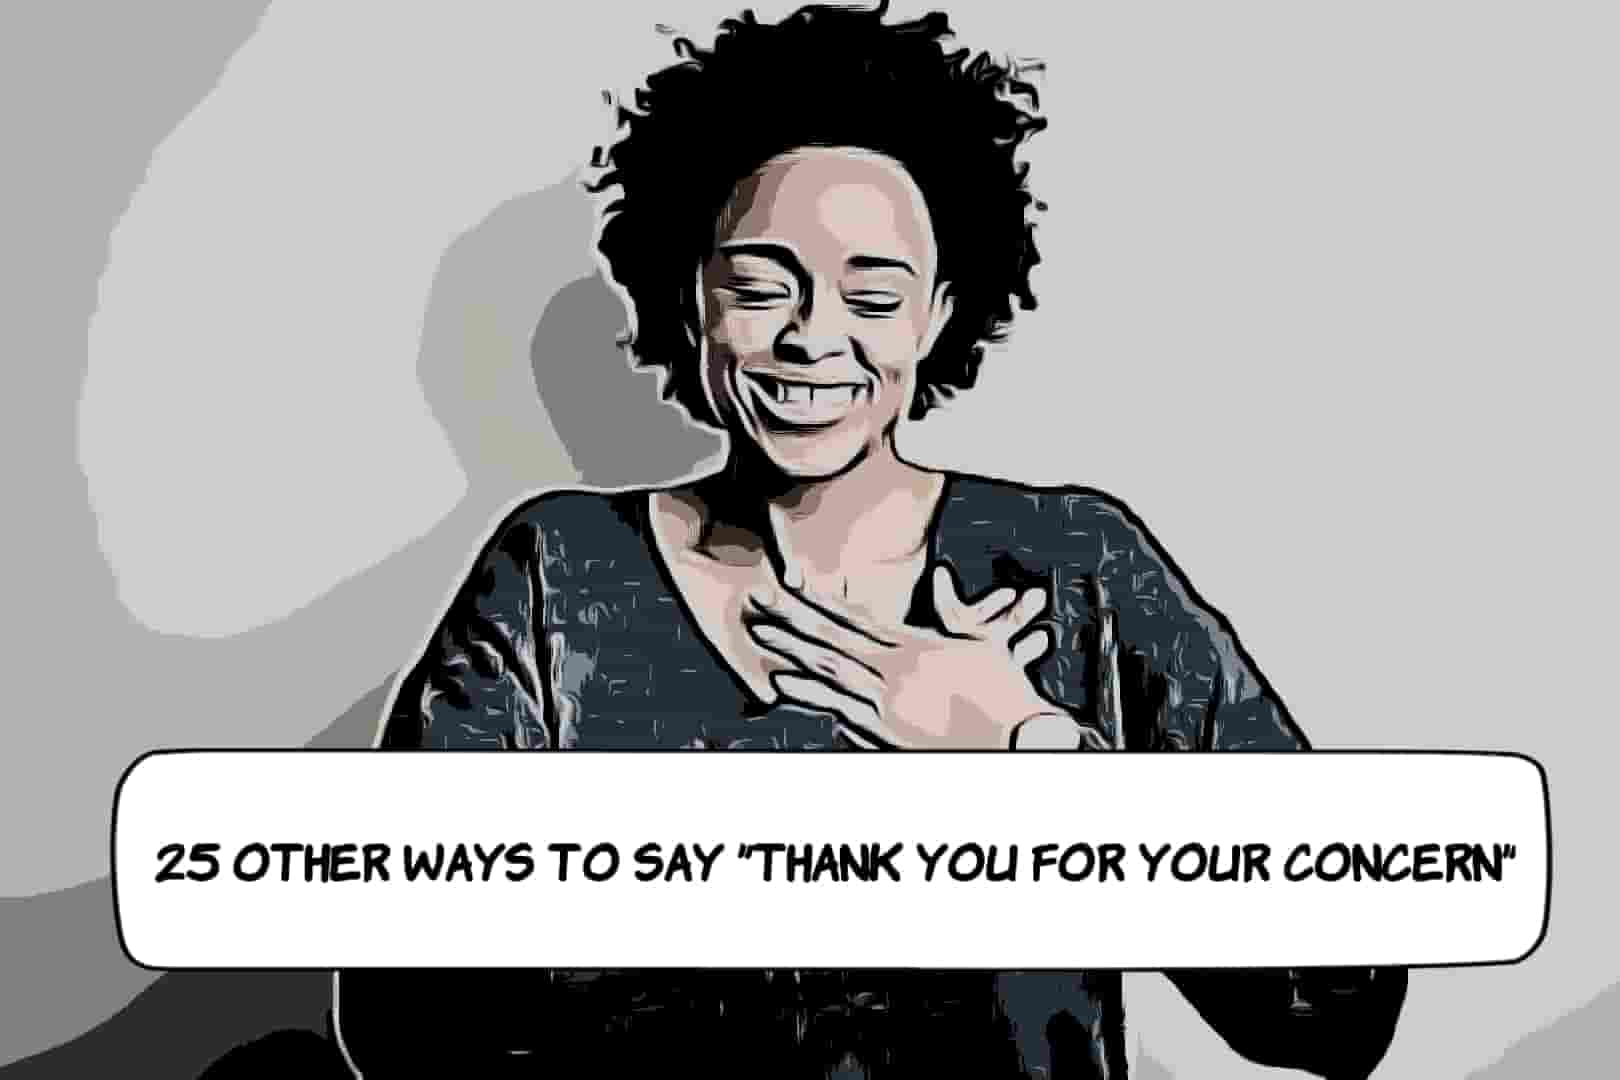 Other Ways to Say Thank You for Your Concern